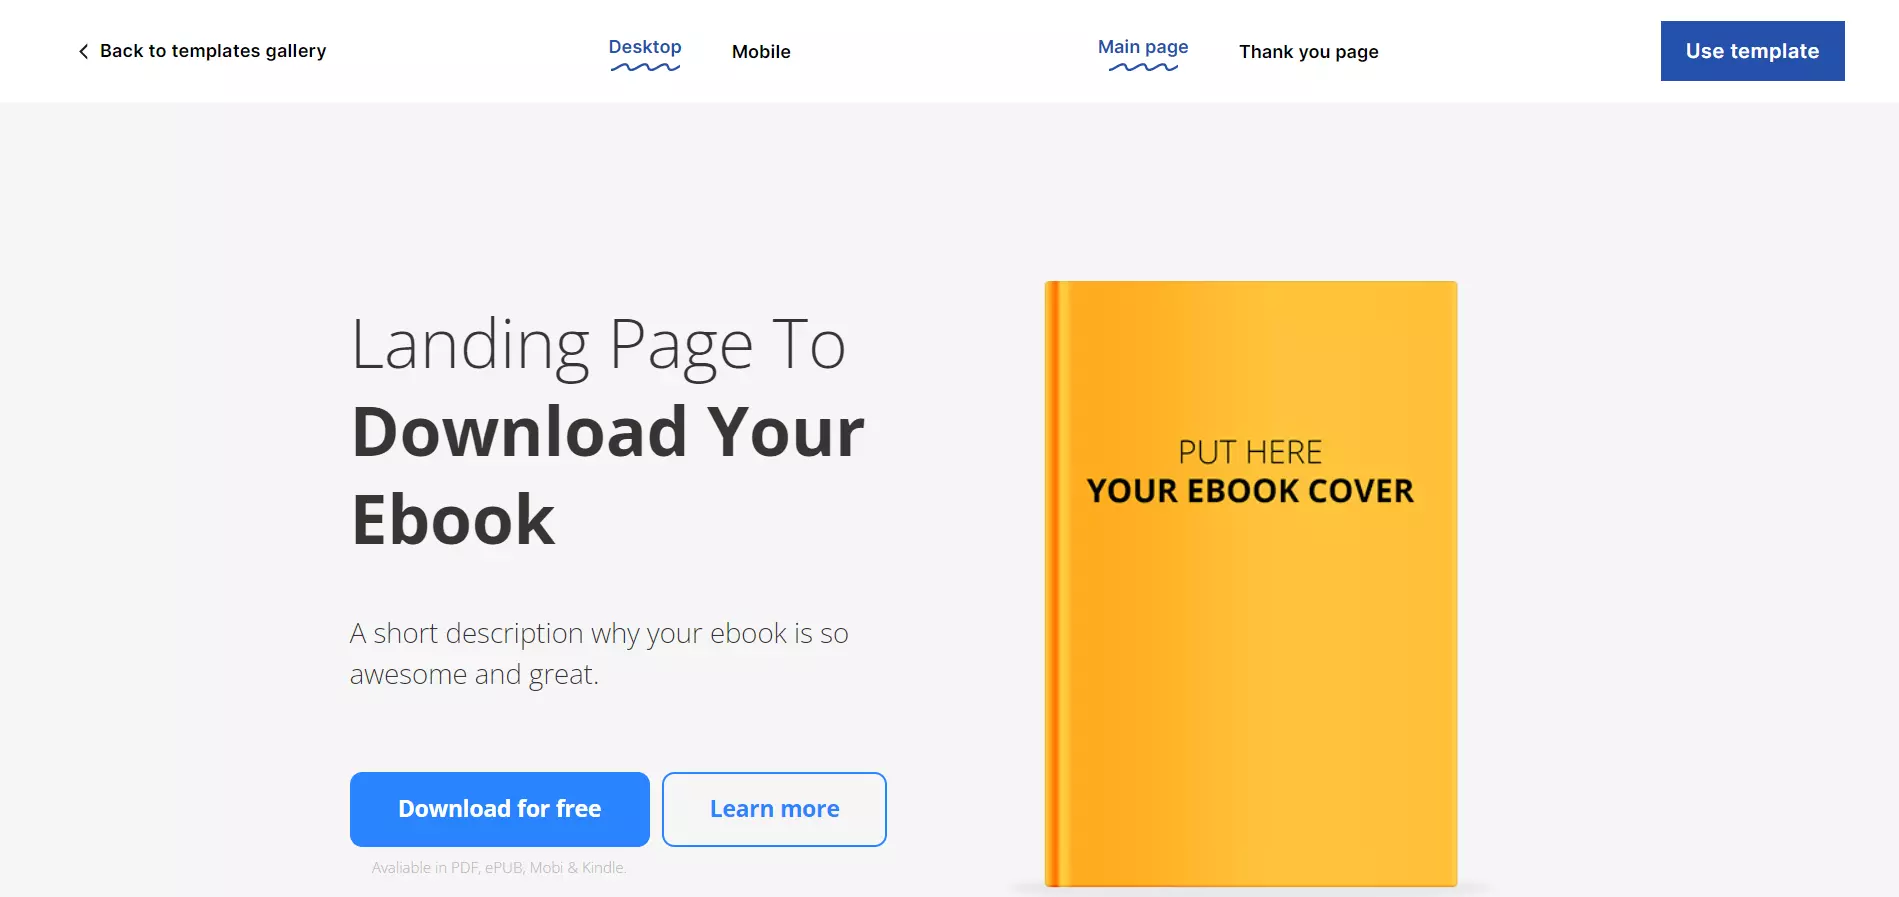 e-book download landing page